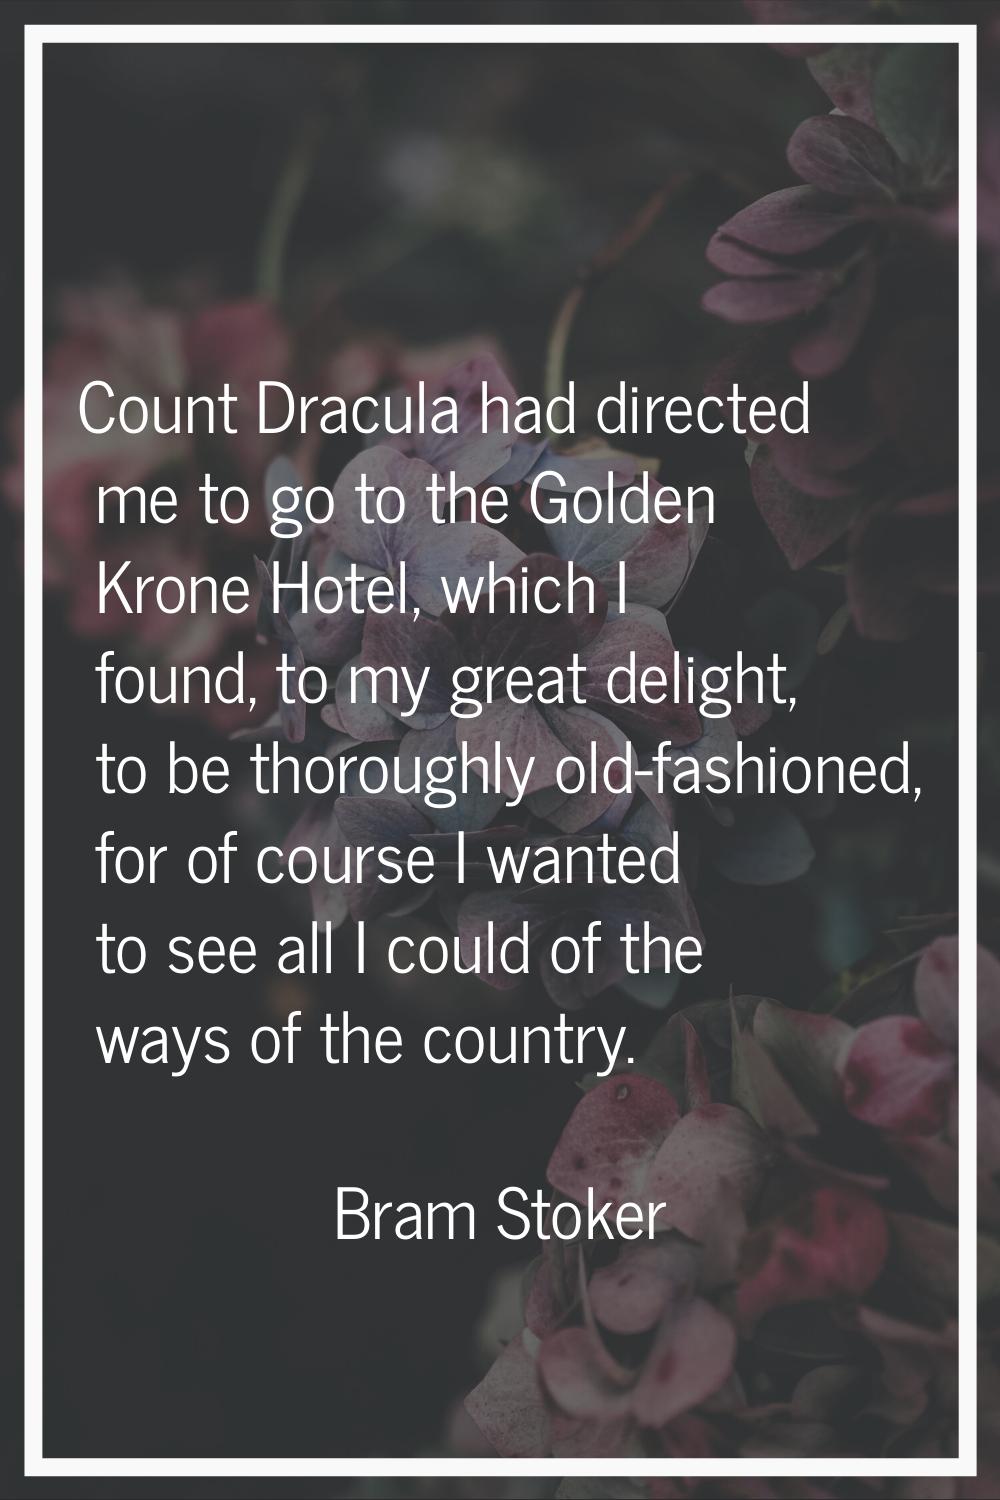 Count Dracula had directed me to go to the Golden Krone Hotel, which I found, to my great delight, 